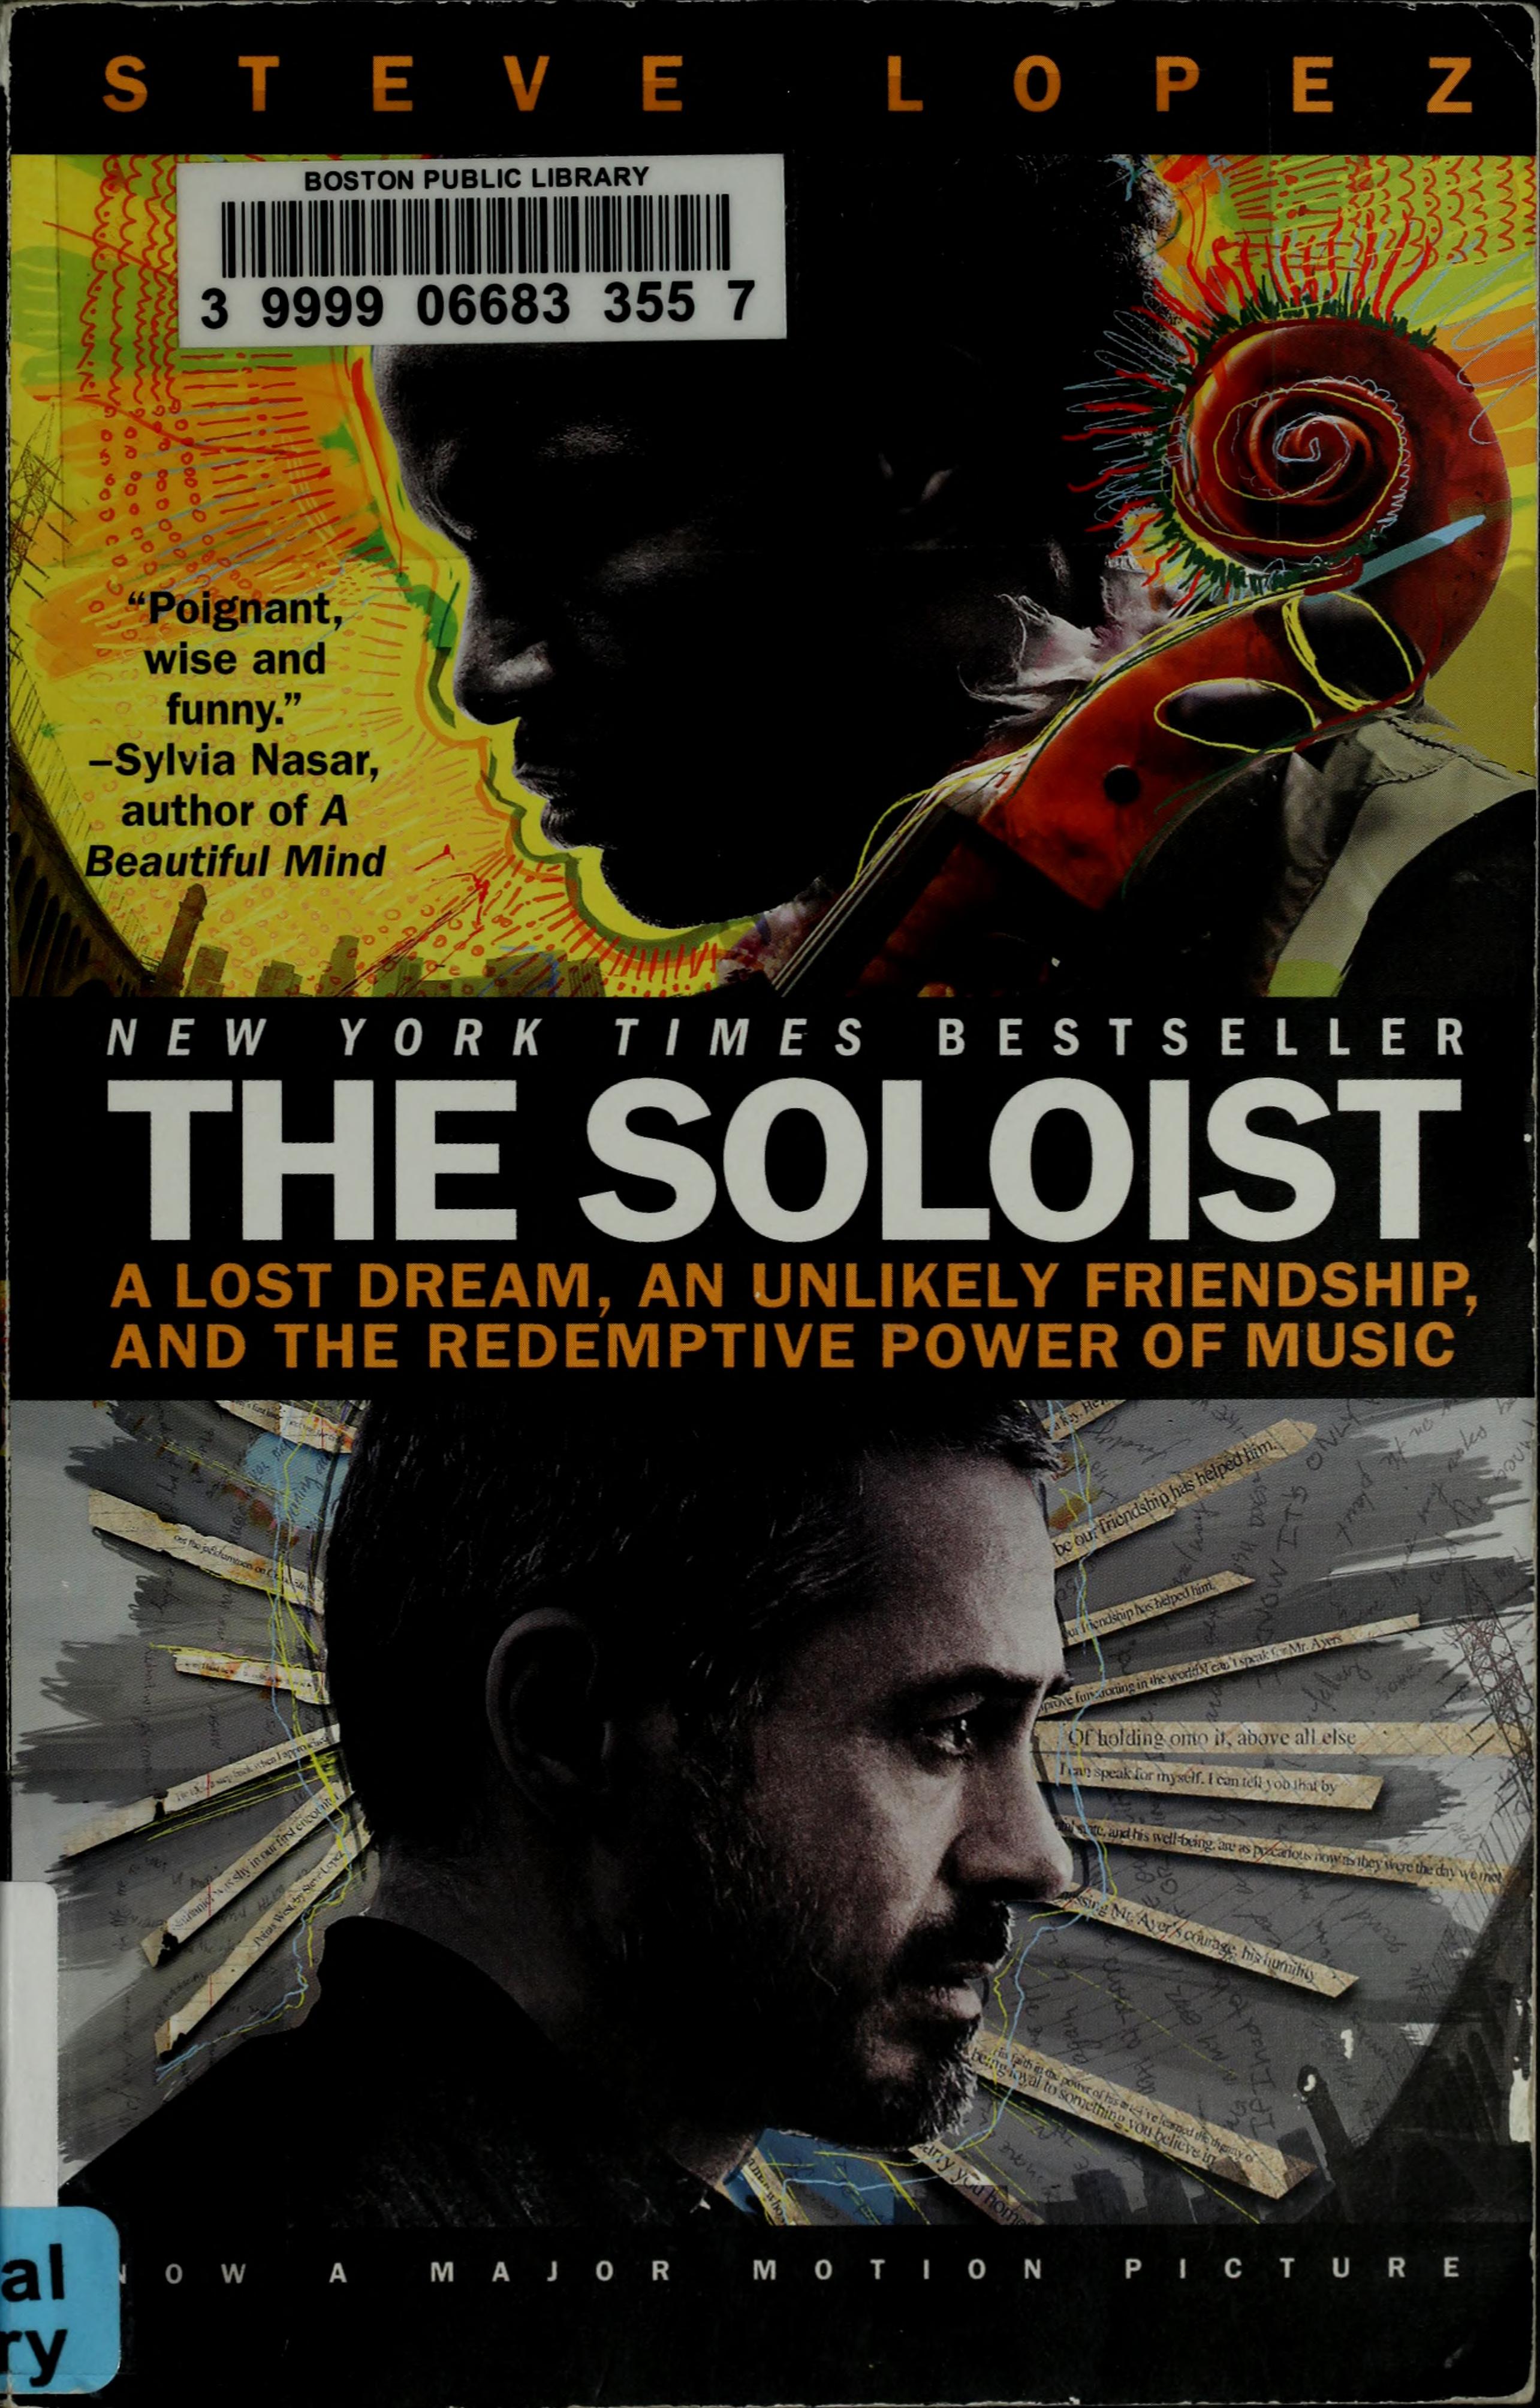 The Soloist By Steve Lopez, A Lost Dream and Unlikely Friendship